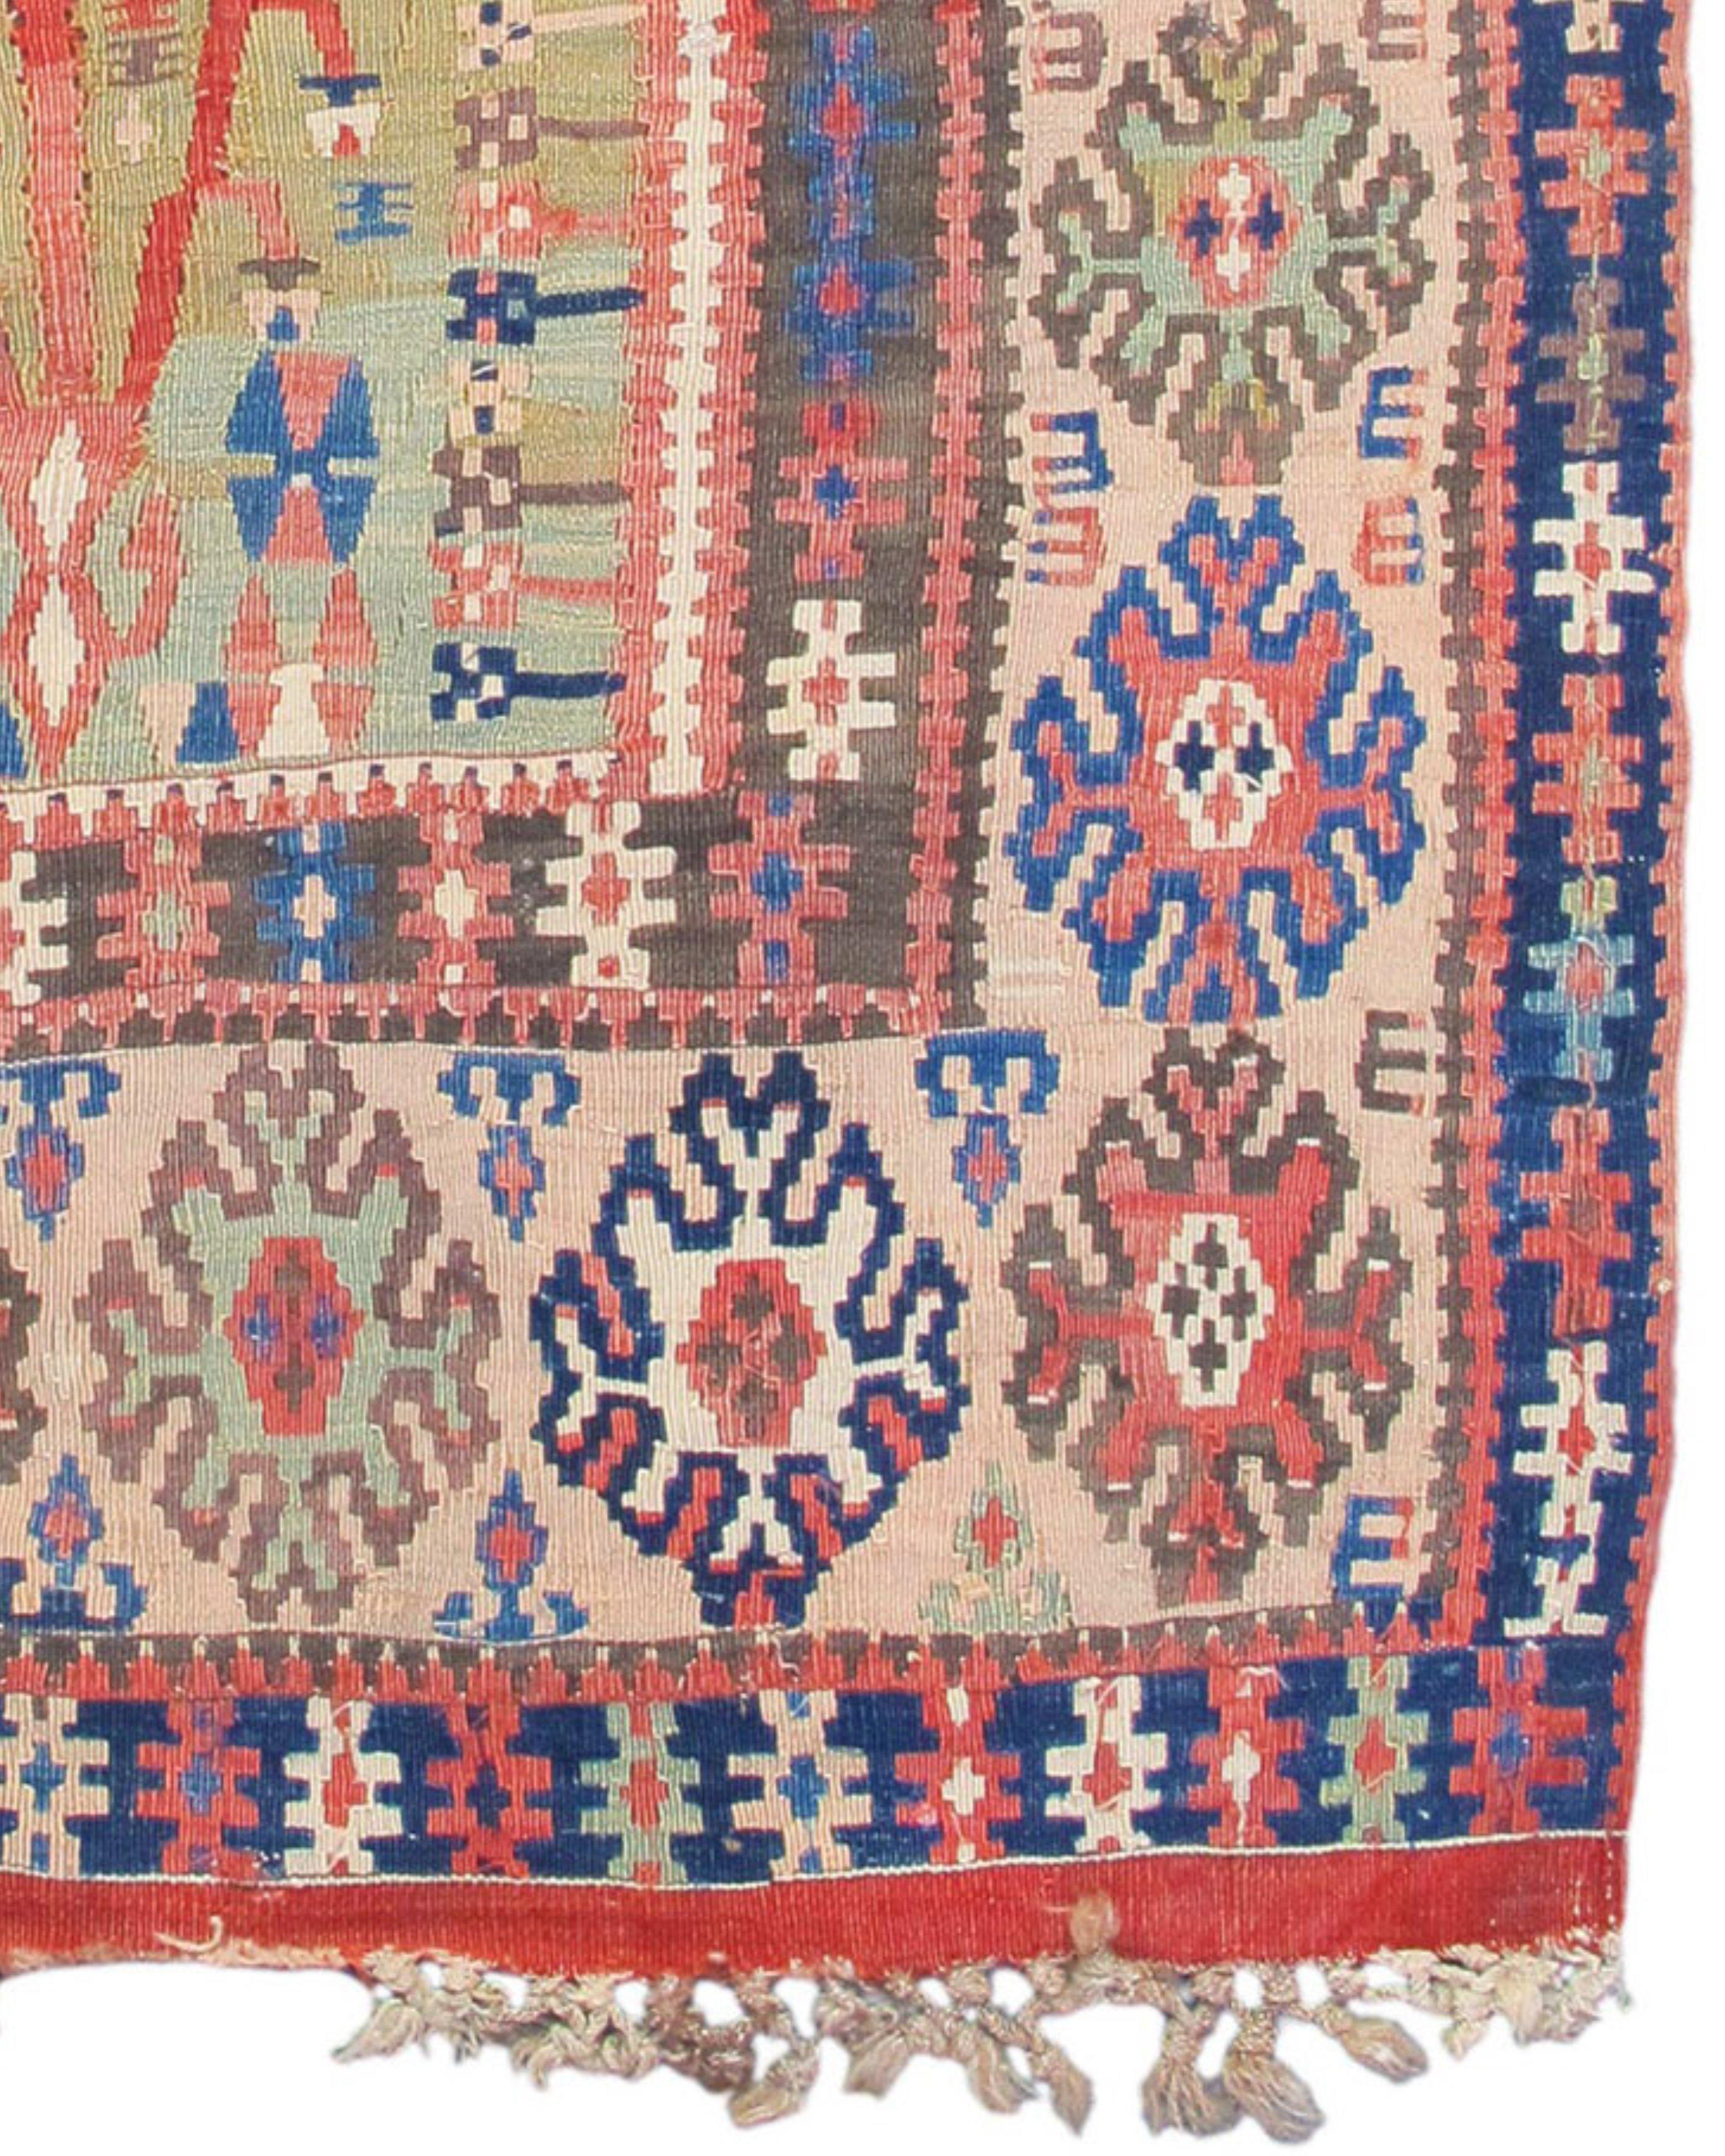 Antique Anatolian Bayburt Kilim Rug, 19th Century In Excellent Condition For Sale In San Francisco, CA